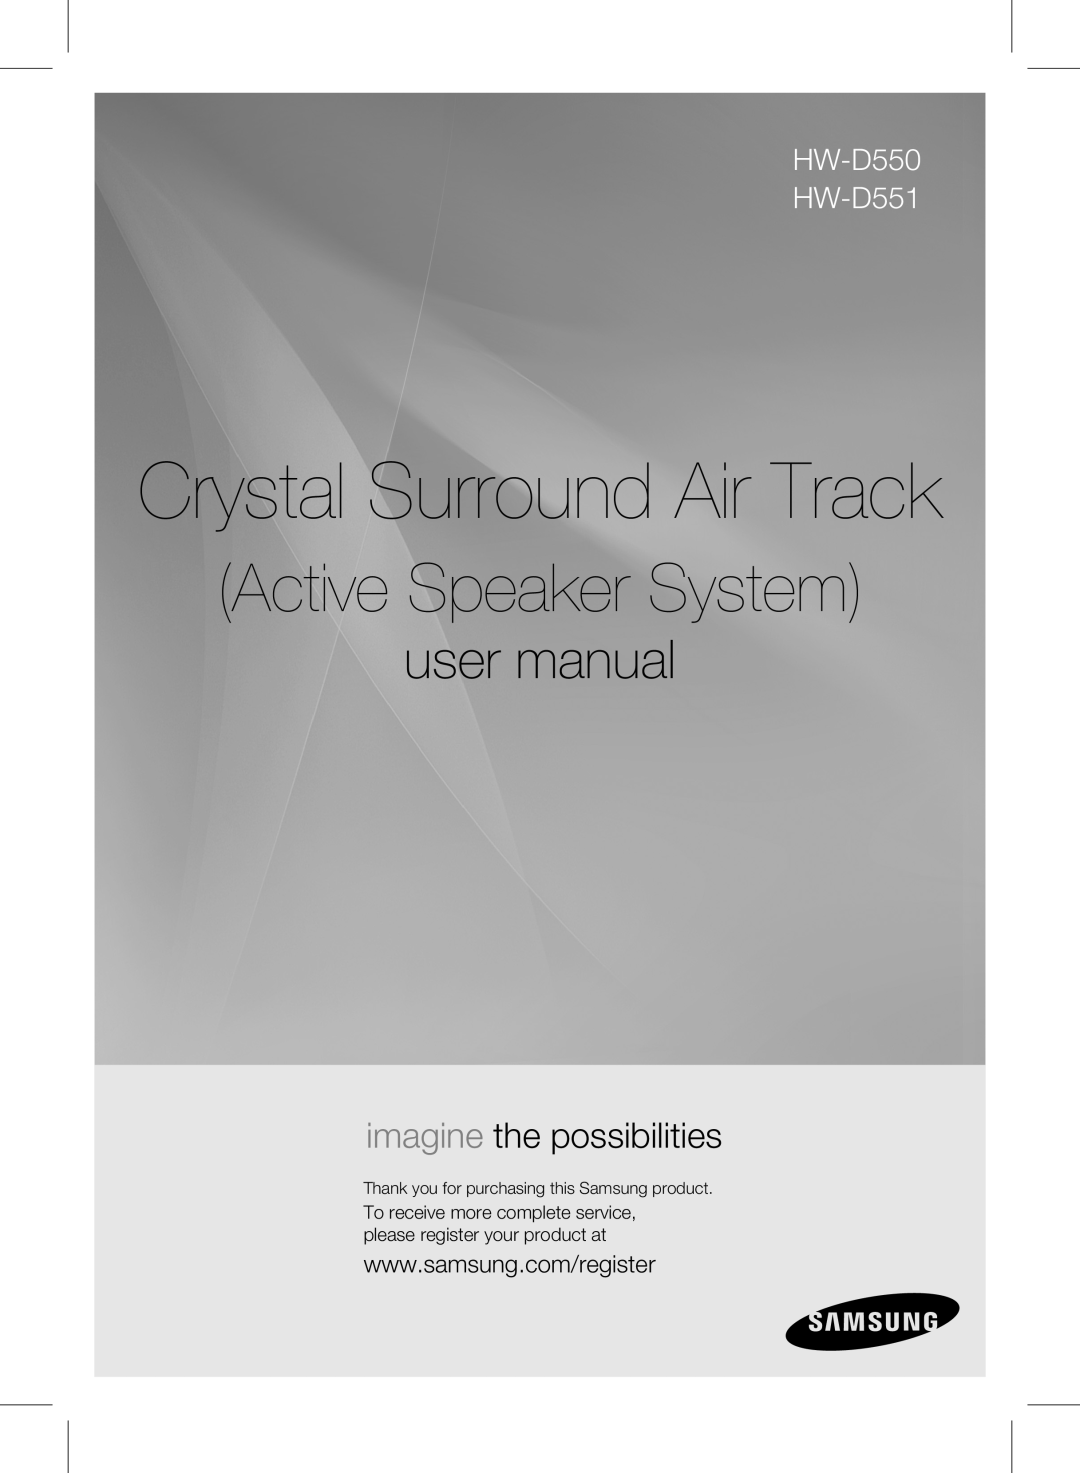 Samsung user manual Crystal Surround Air Track, Active Speaker System, imagine the possibilities, HW-D550 HW-D551 